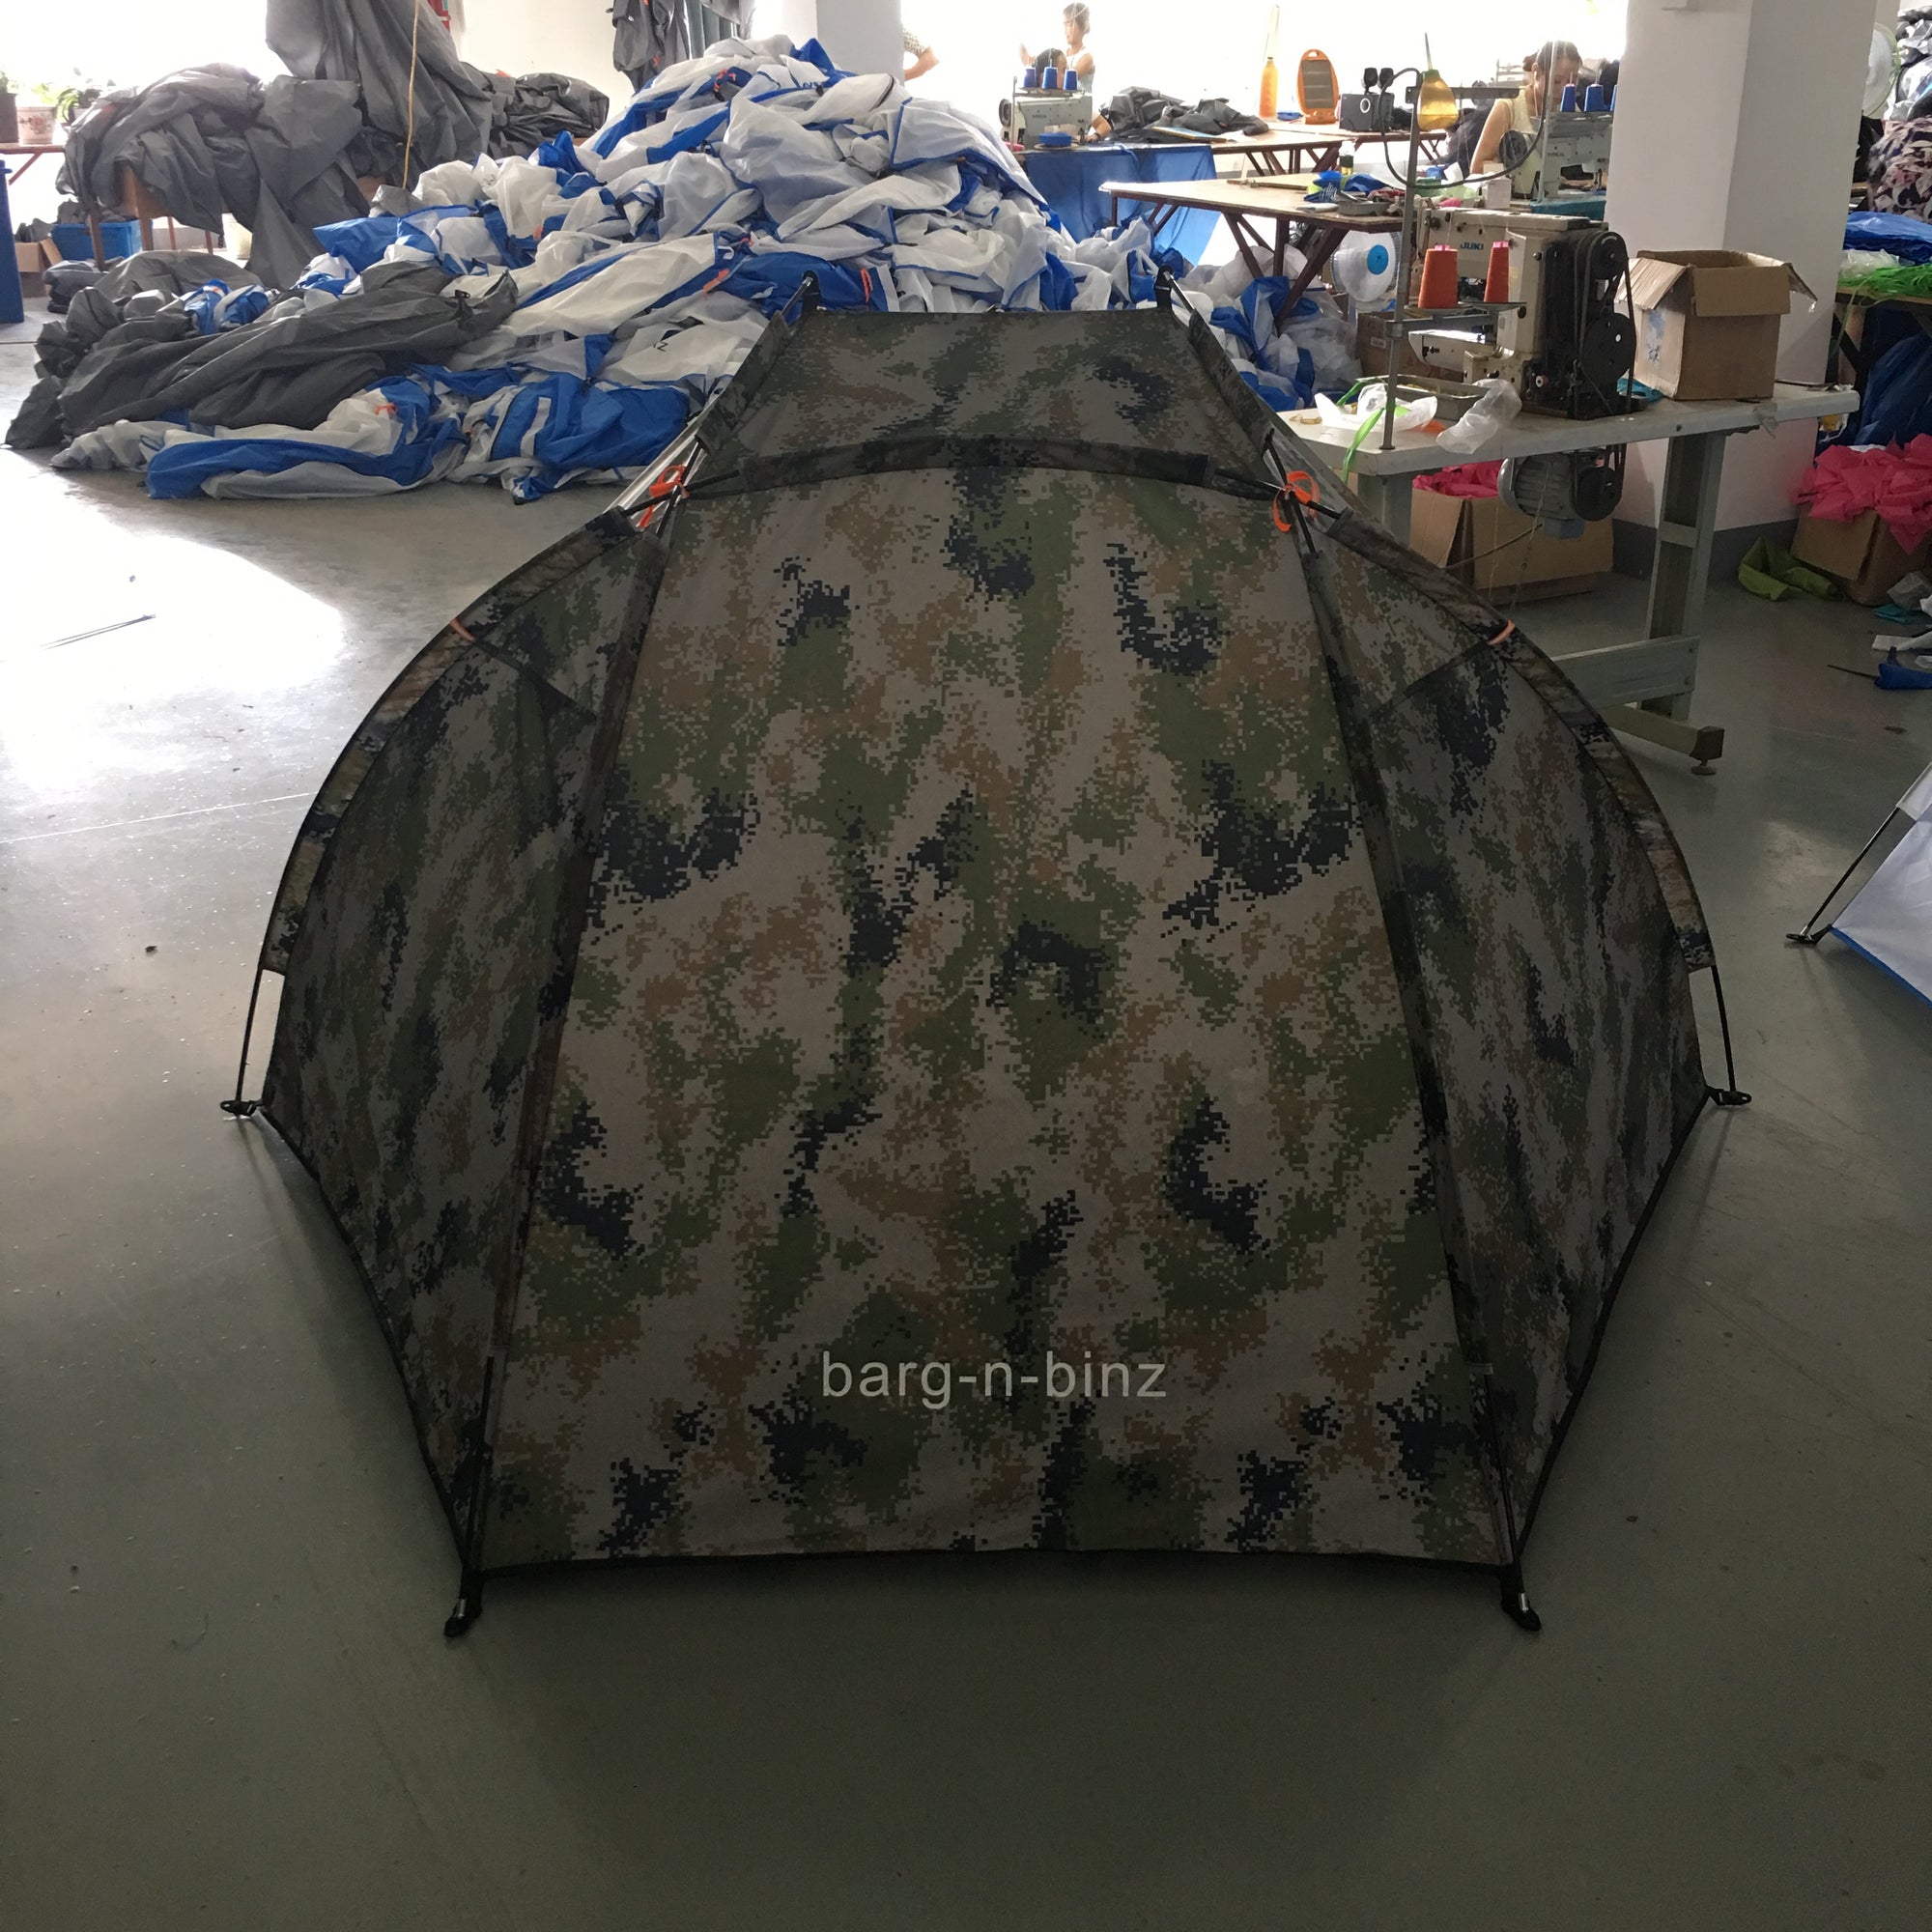 Hot Selling 2 Person Instant Pop Up Fishing Tent,Camouflage Beach tent -  Barg N Binz